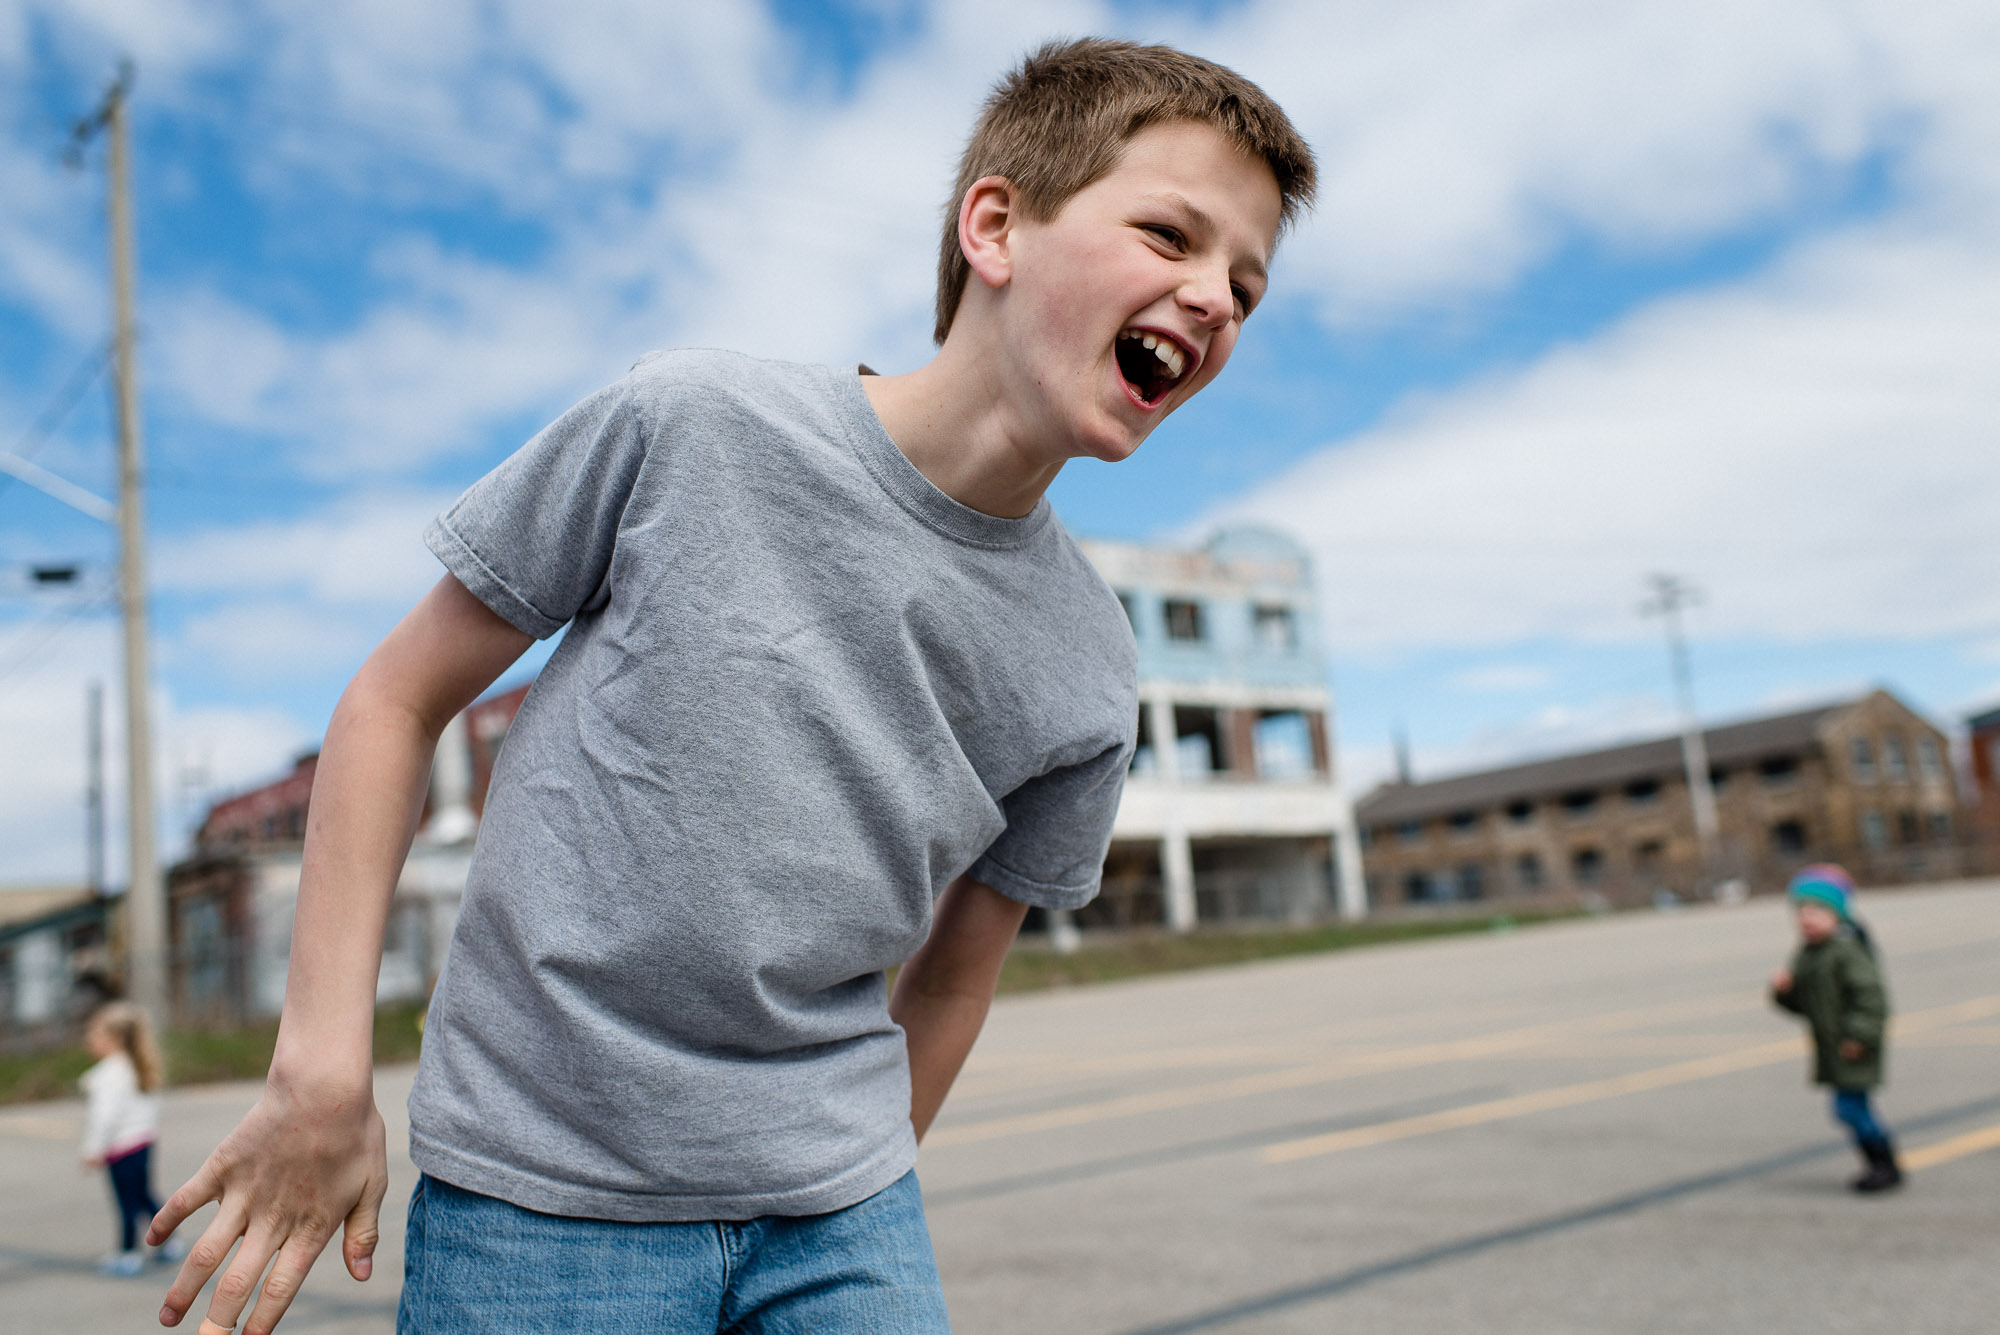 boy laughs against a blue sky with clouds